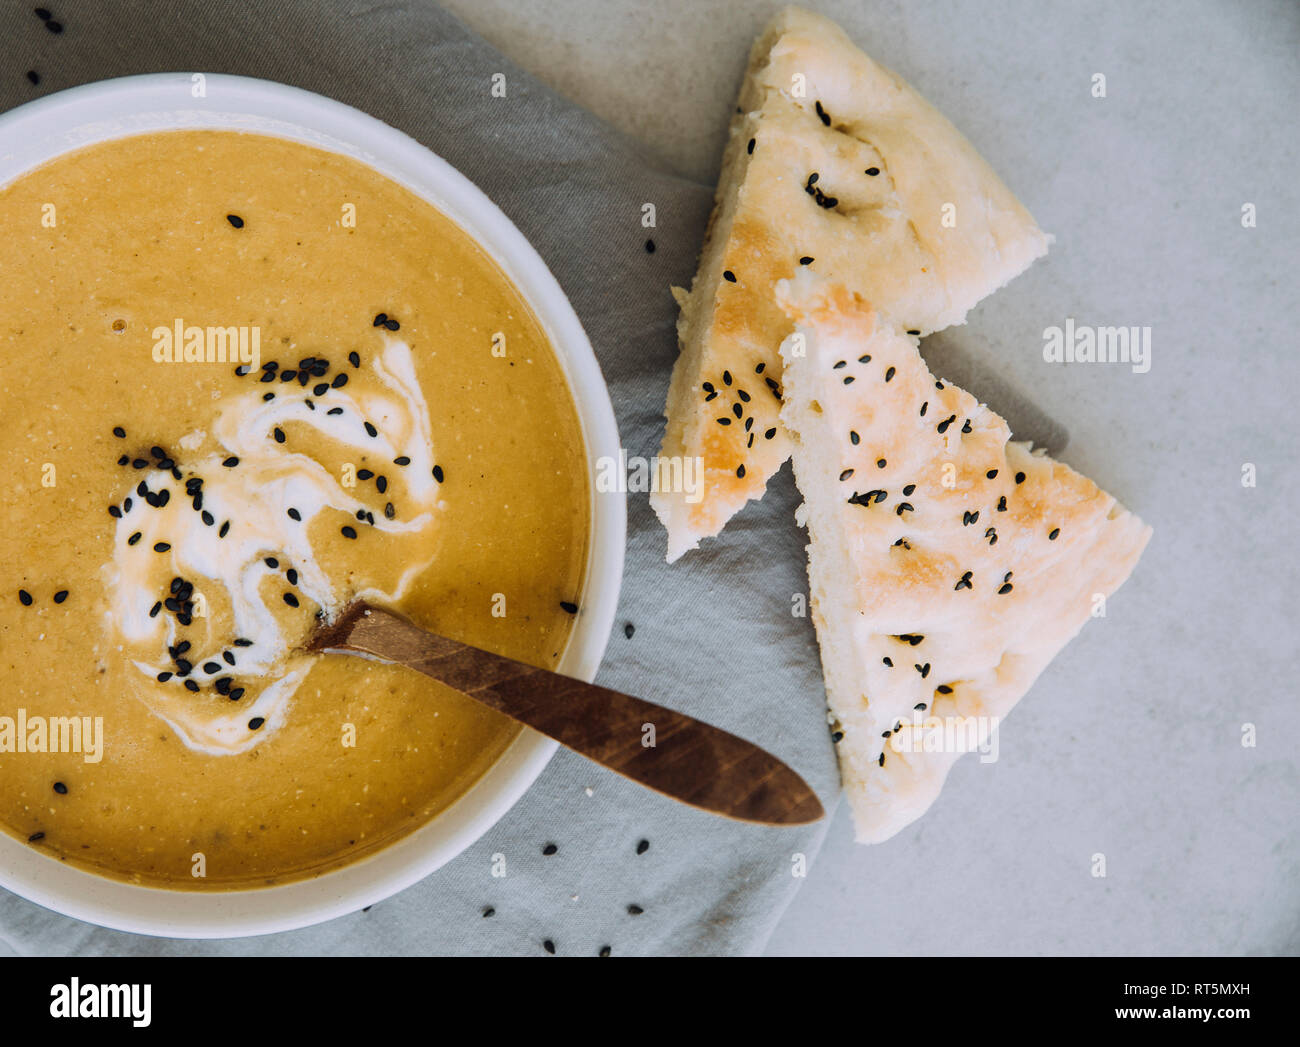 Lentil soup with sweet potato and bread, from above Stock Photo